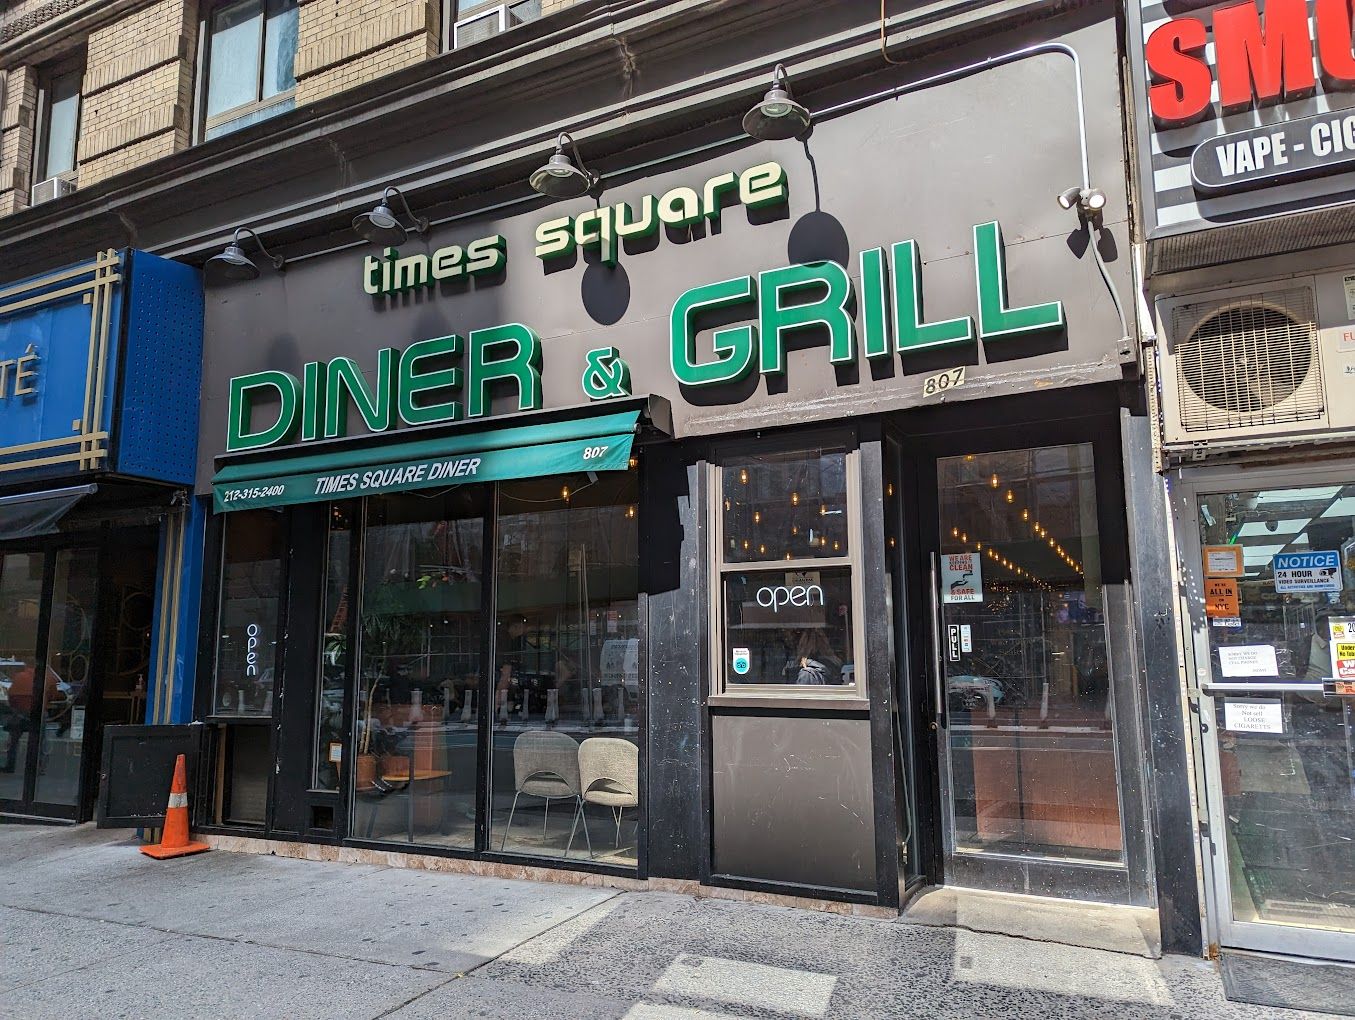 Times Square Diner & Grill